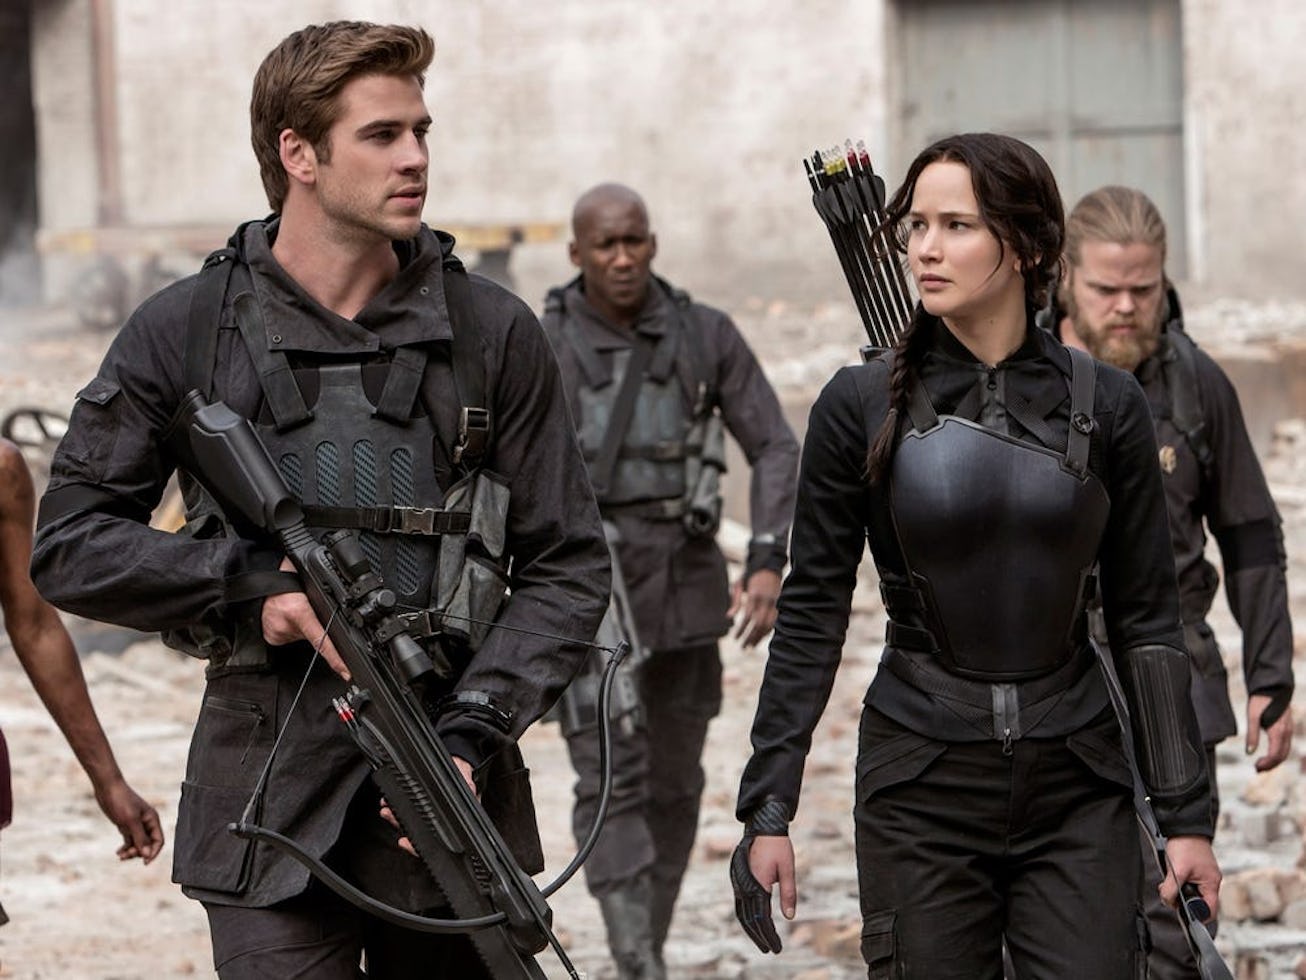 Liam Hemsworth and Jennifer Lawrence in 'The Hunger Games'